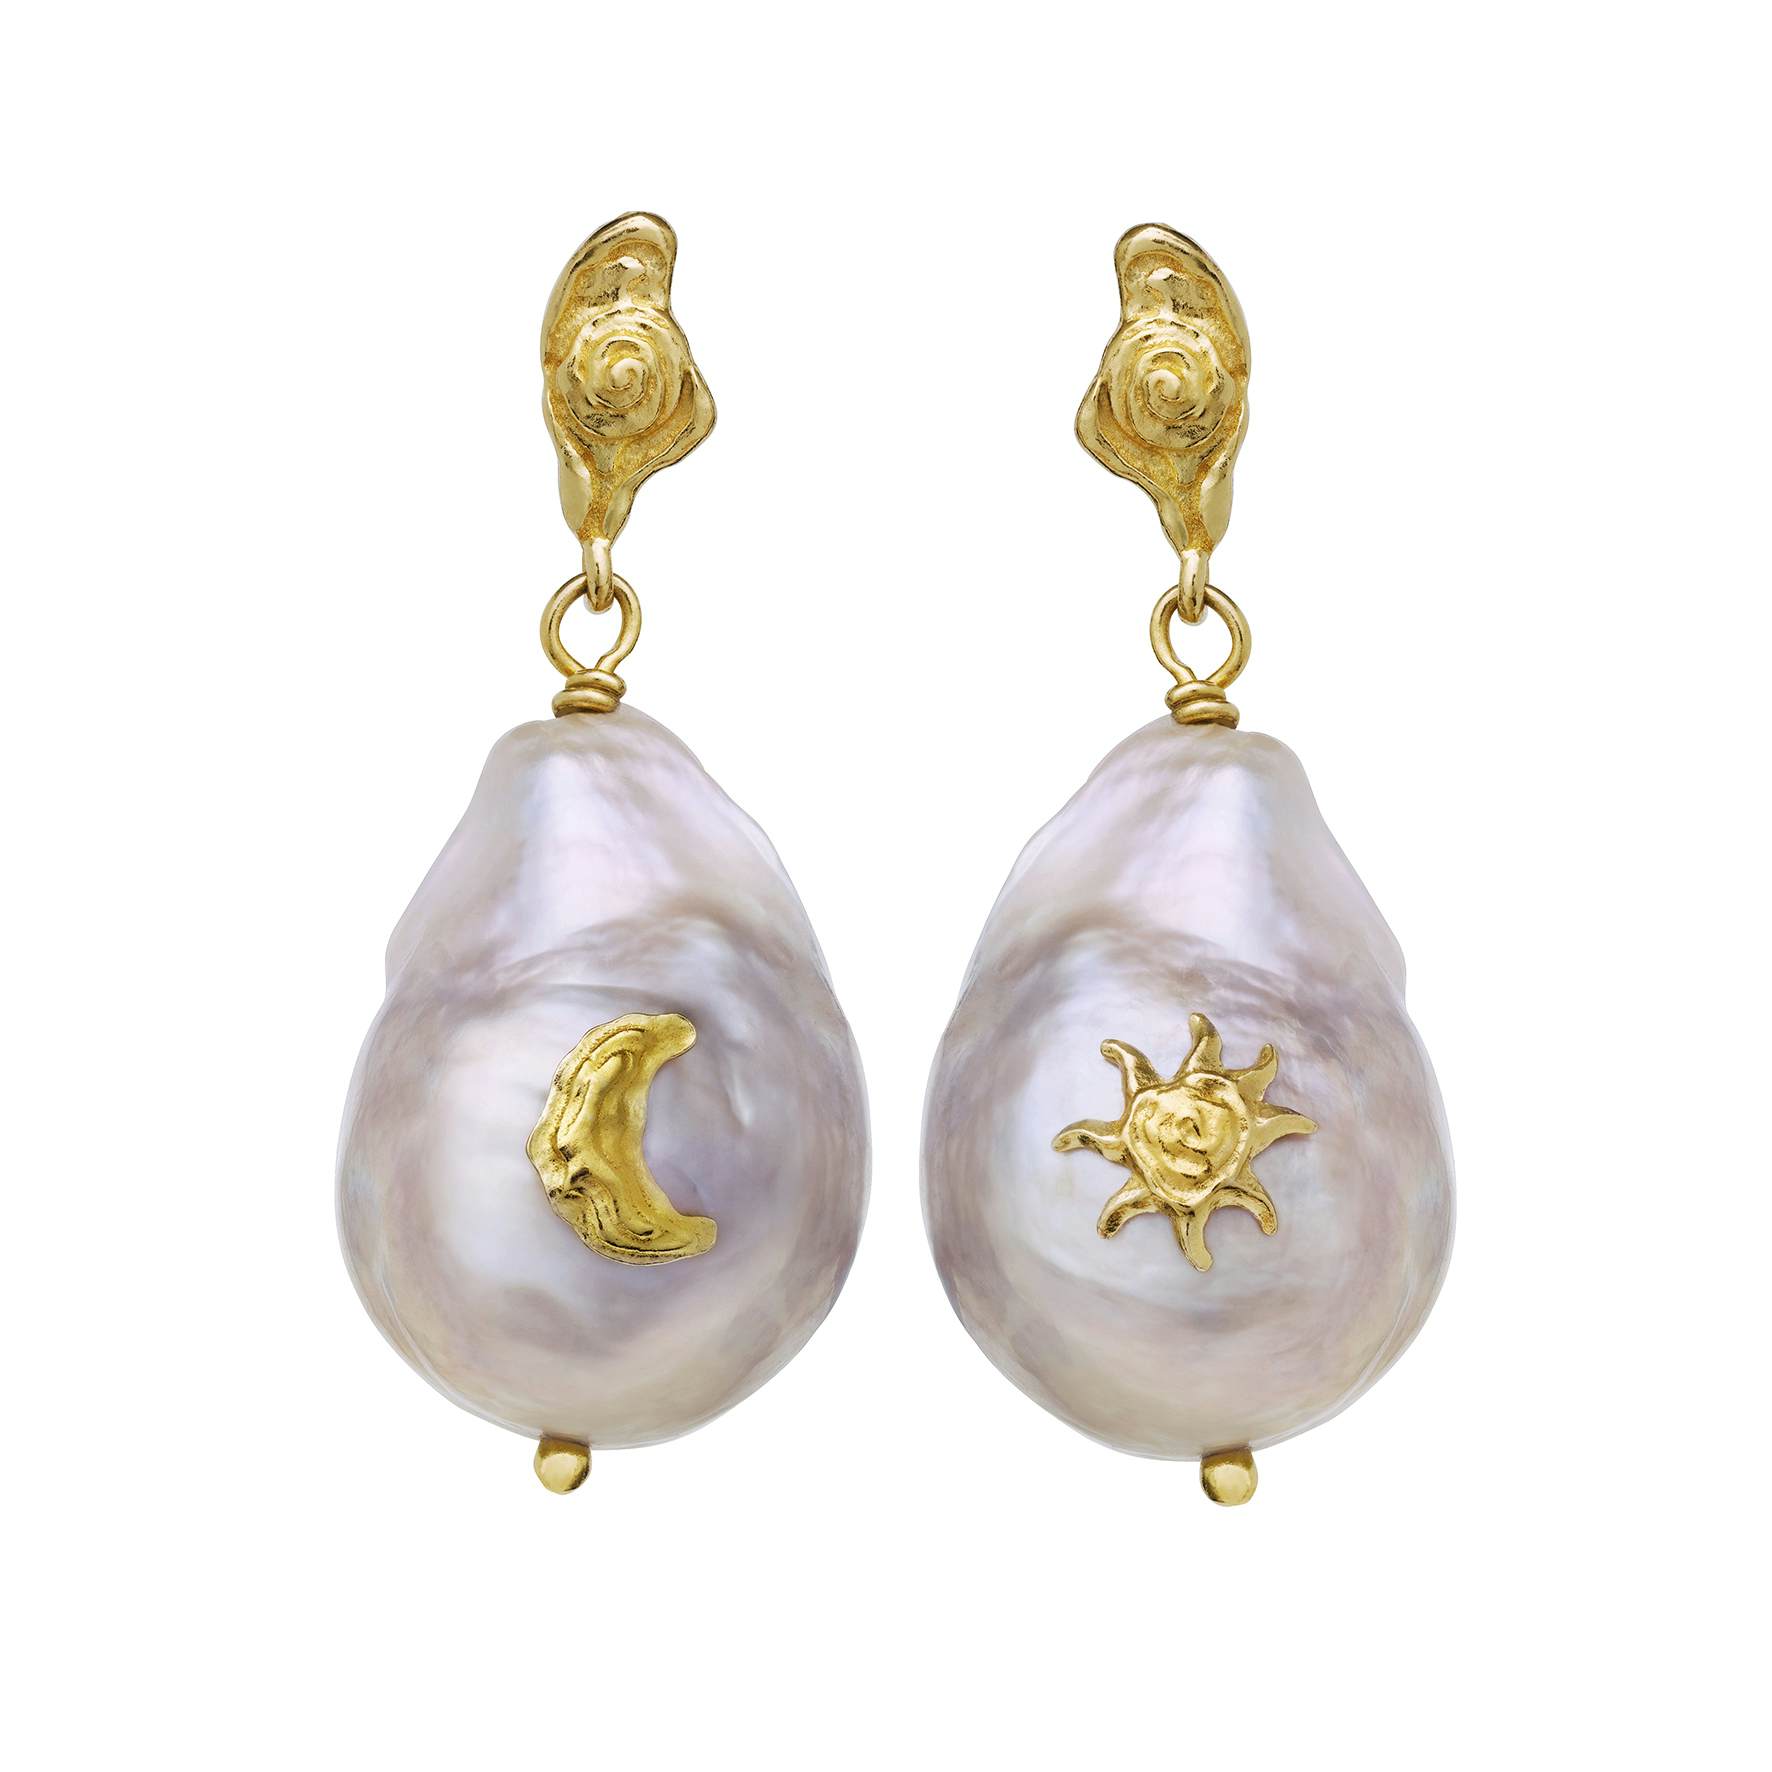 Claire Earrings from Maanesten in Goldplated-Silver Sterling 925|Freshwater Pearl